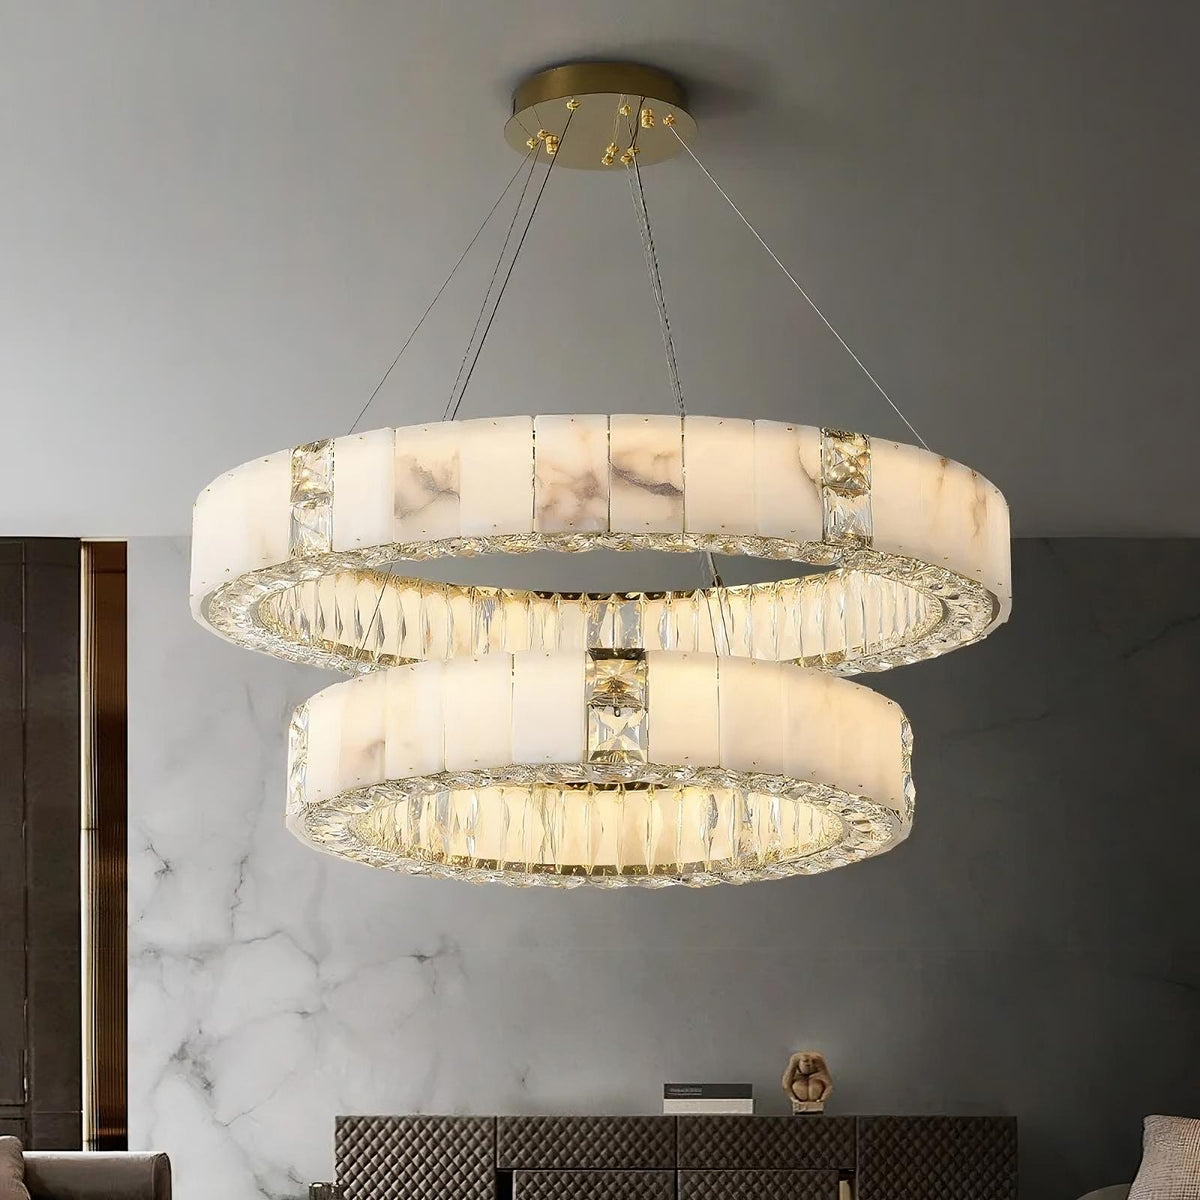 A modern ceiling chandelier, the Natural Marble & Crystal Modern Ceiling Light Fixture by Morsale.com, hangs elegantly, featuring two circular, marble-like rings with glass elements. Each ring is suspended by metal wires against a gray wall with a subtle marble pattern and a touch of luxury home décor visible below.